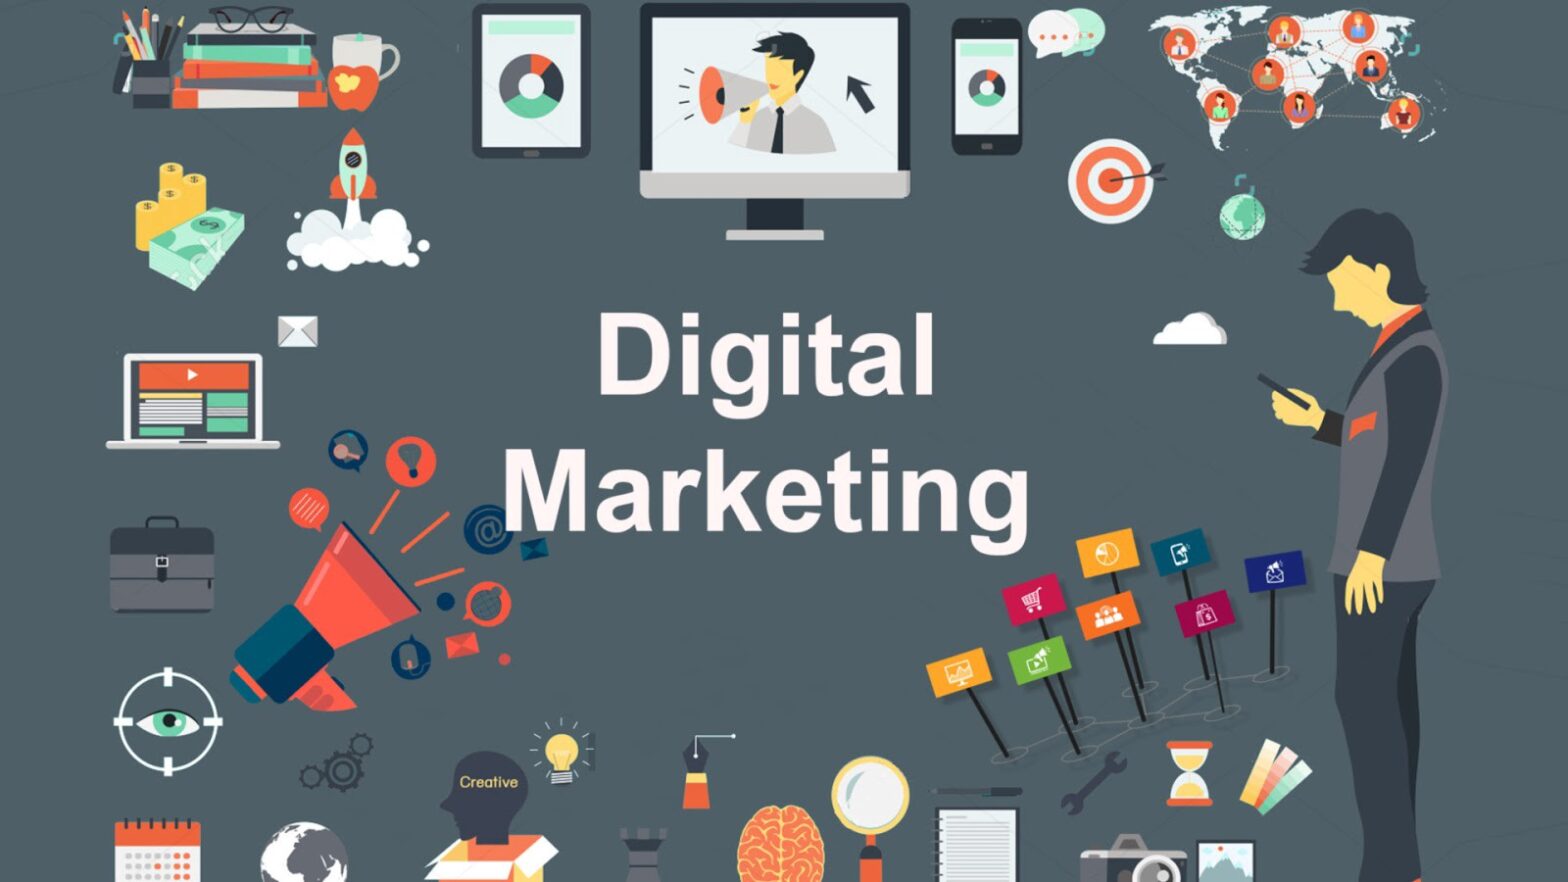 Digital Marketing to be bulwark of business revival post COVID-19